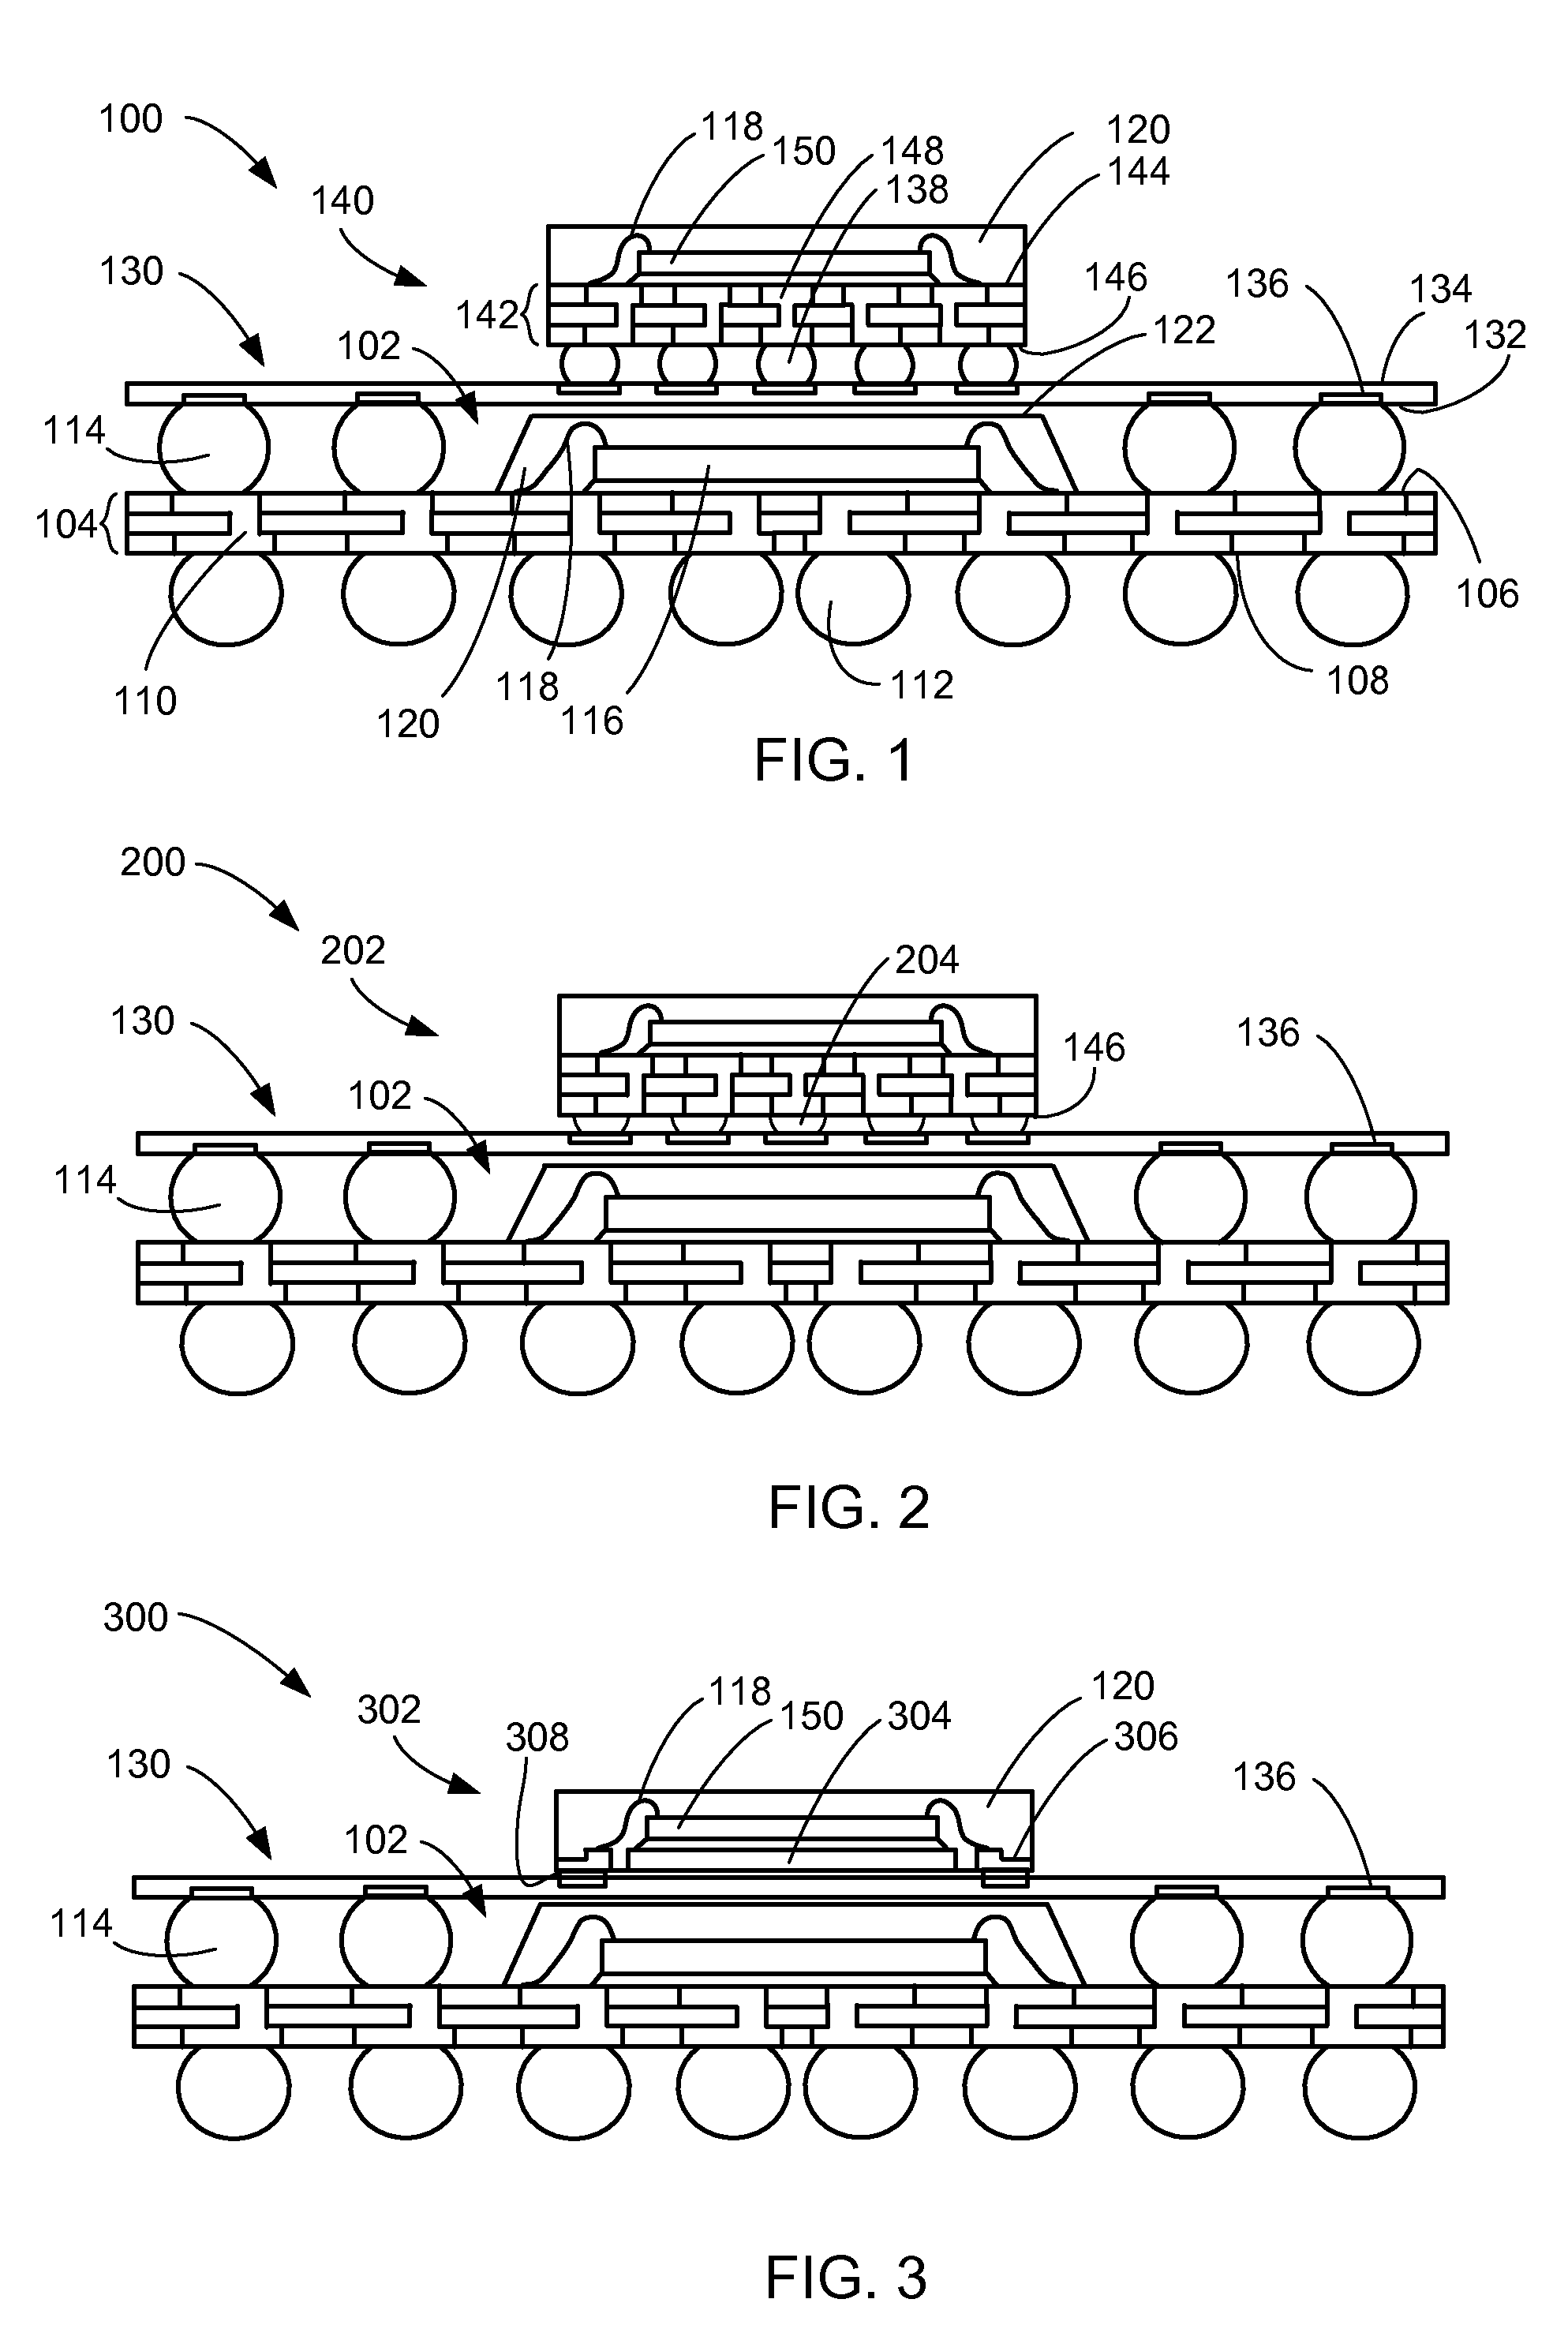 Integrated circuit package-on-package stacking system